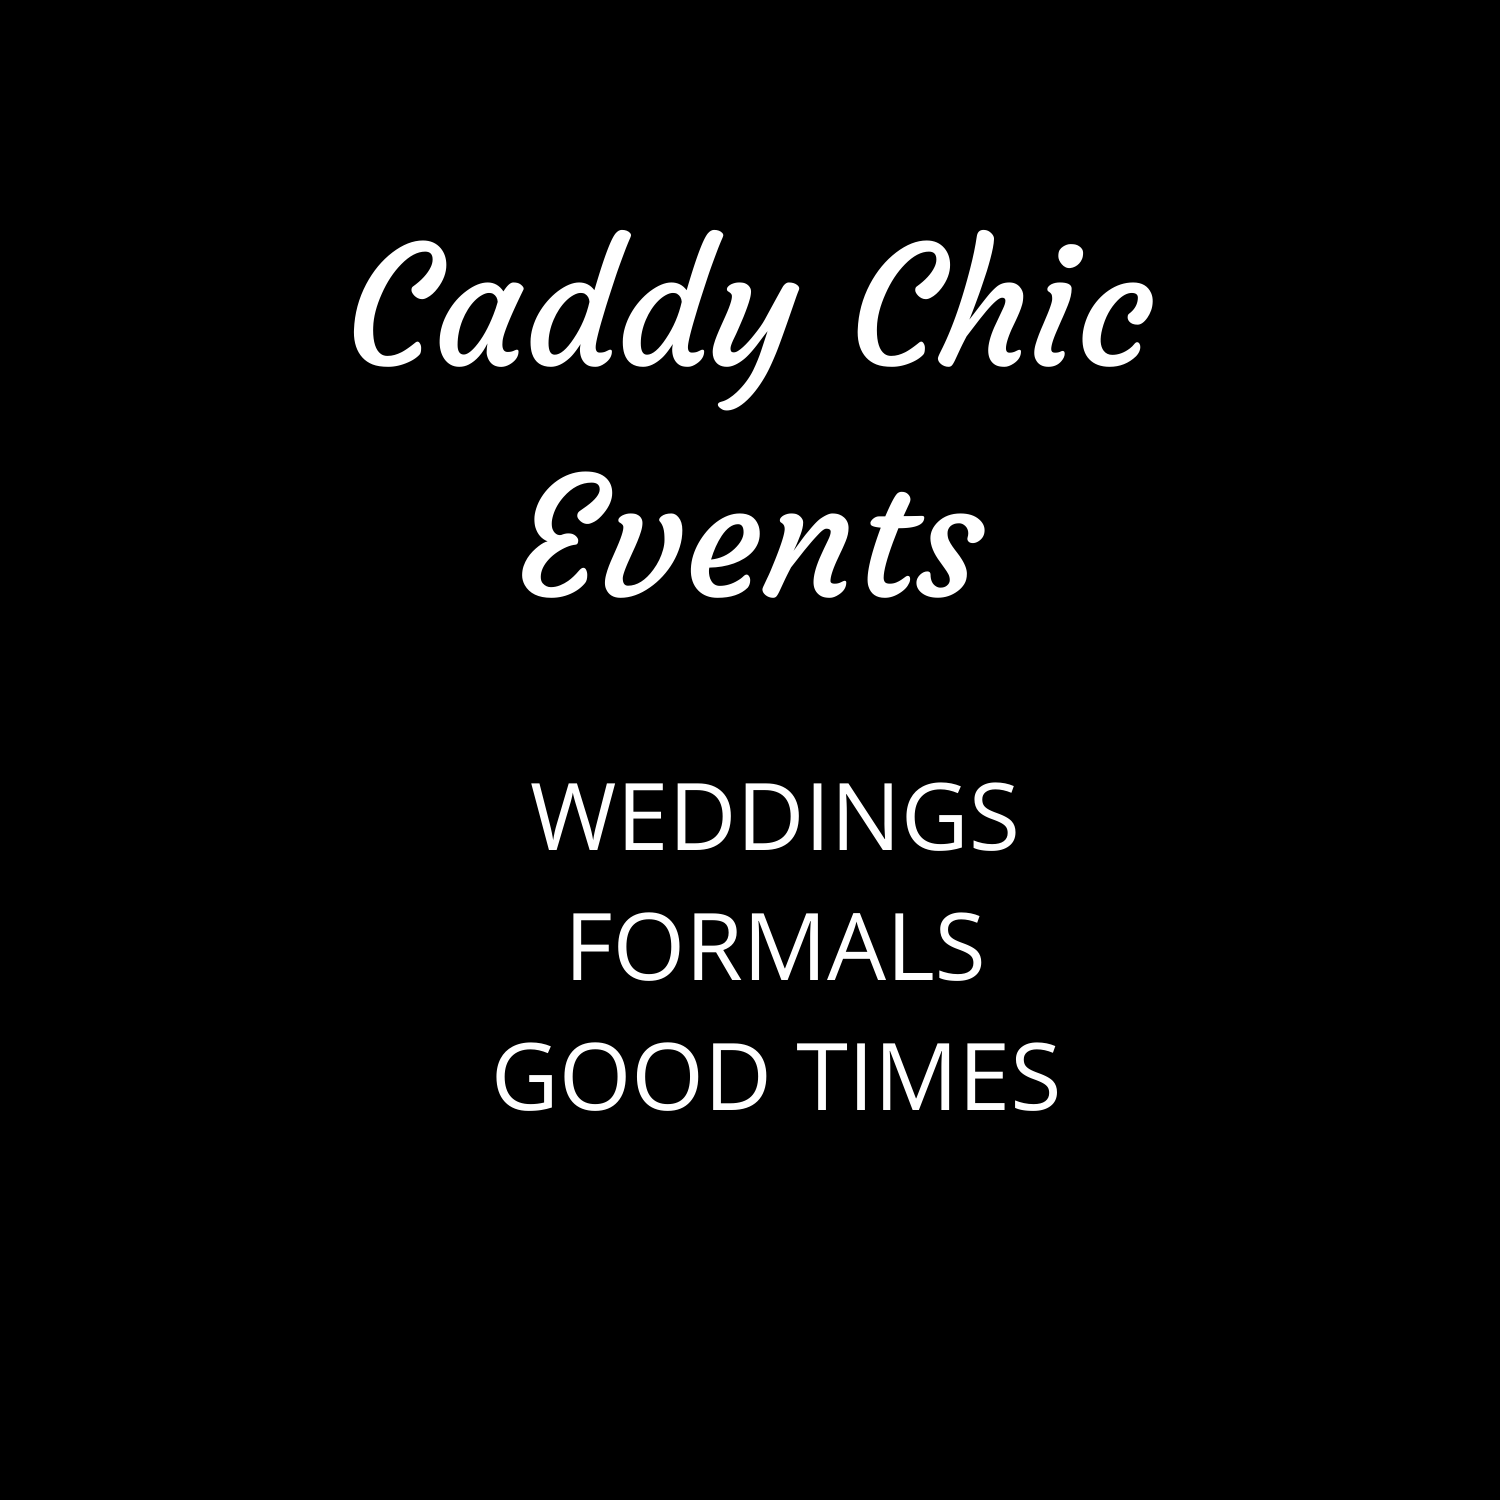 Caddy Chic Events